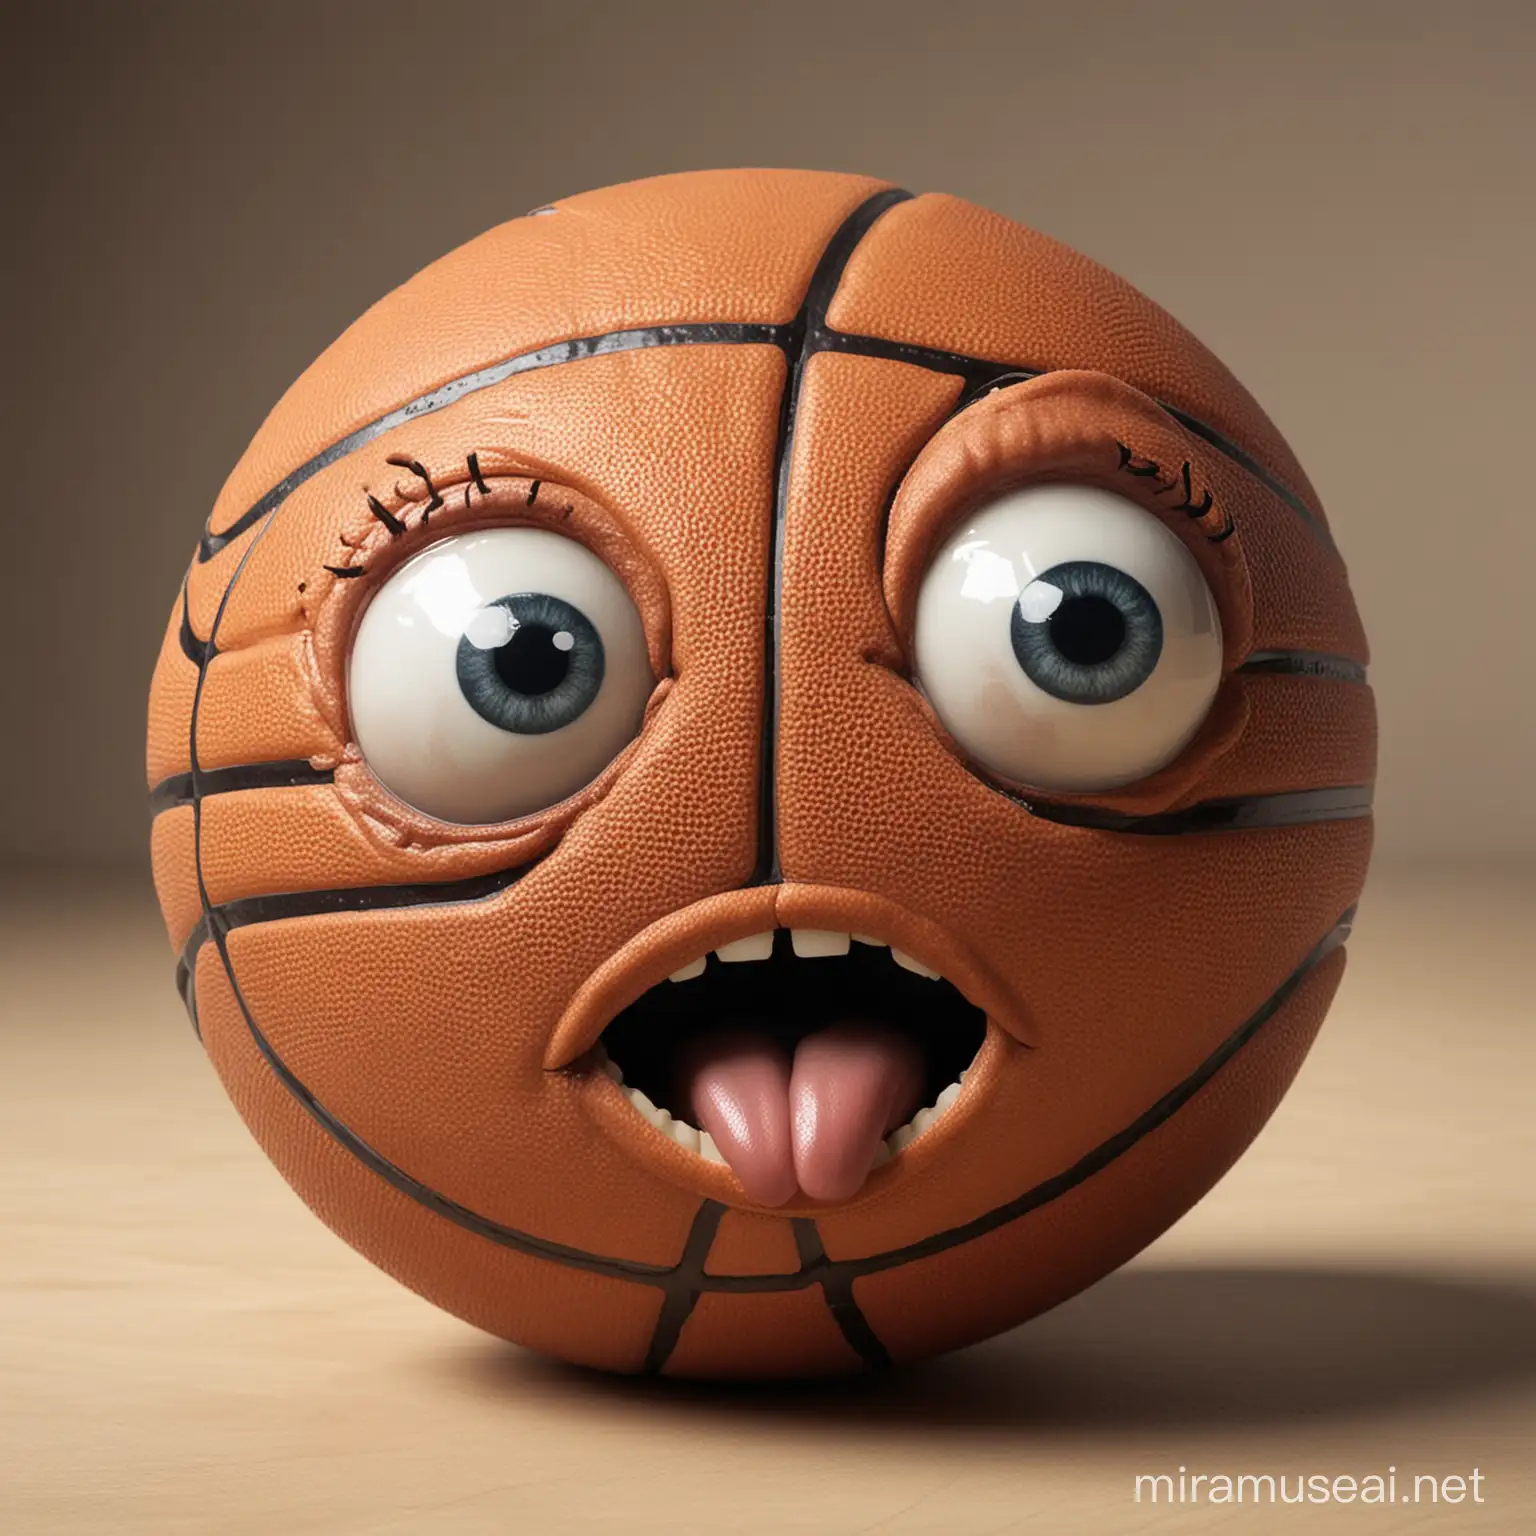 A basketball taking with eyes and mouth